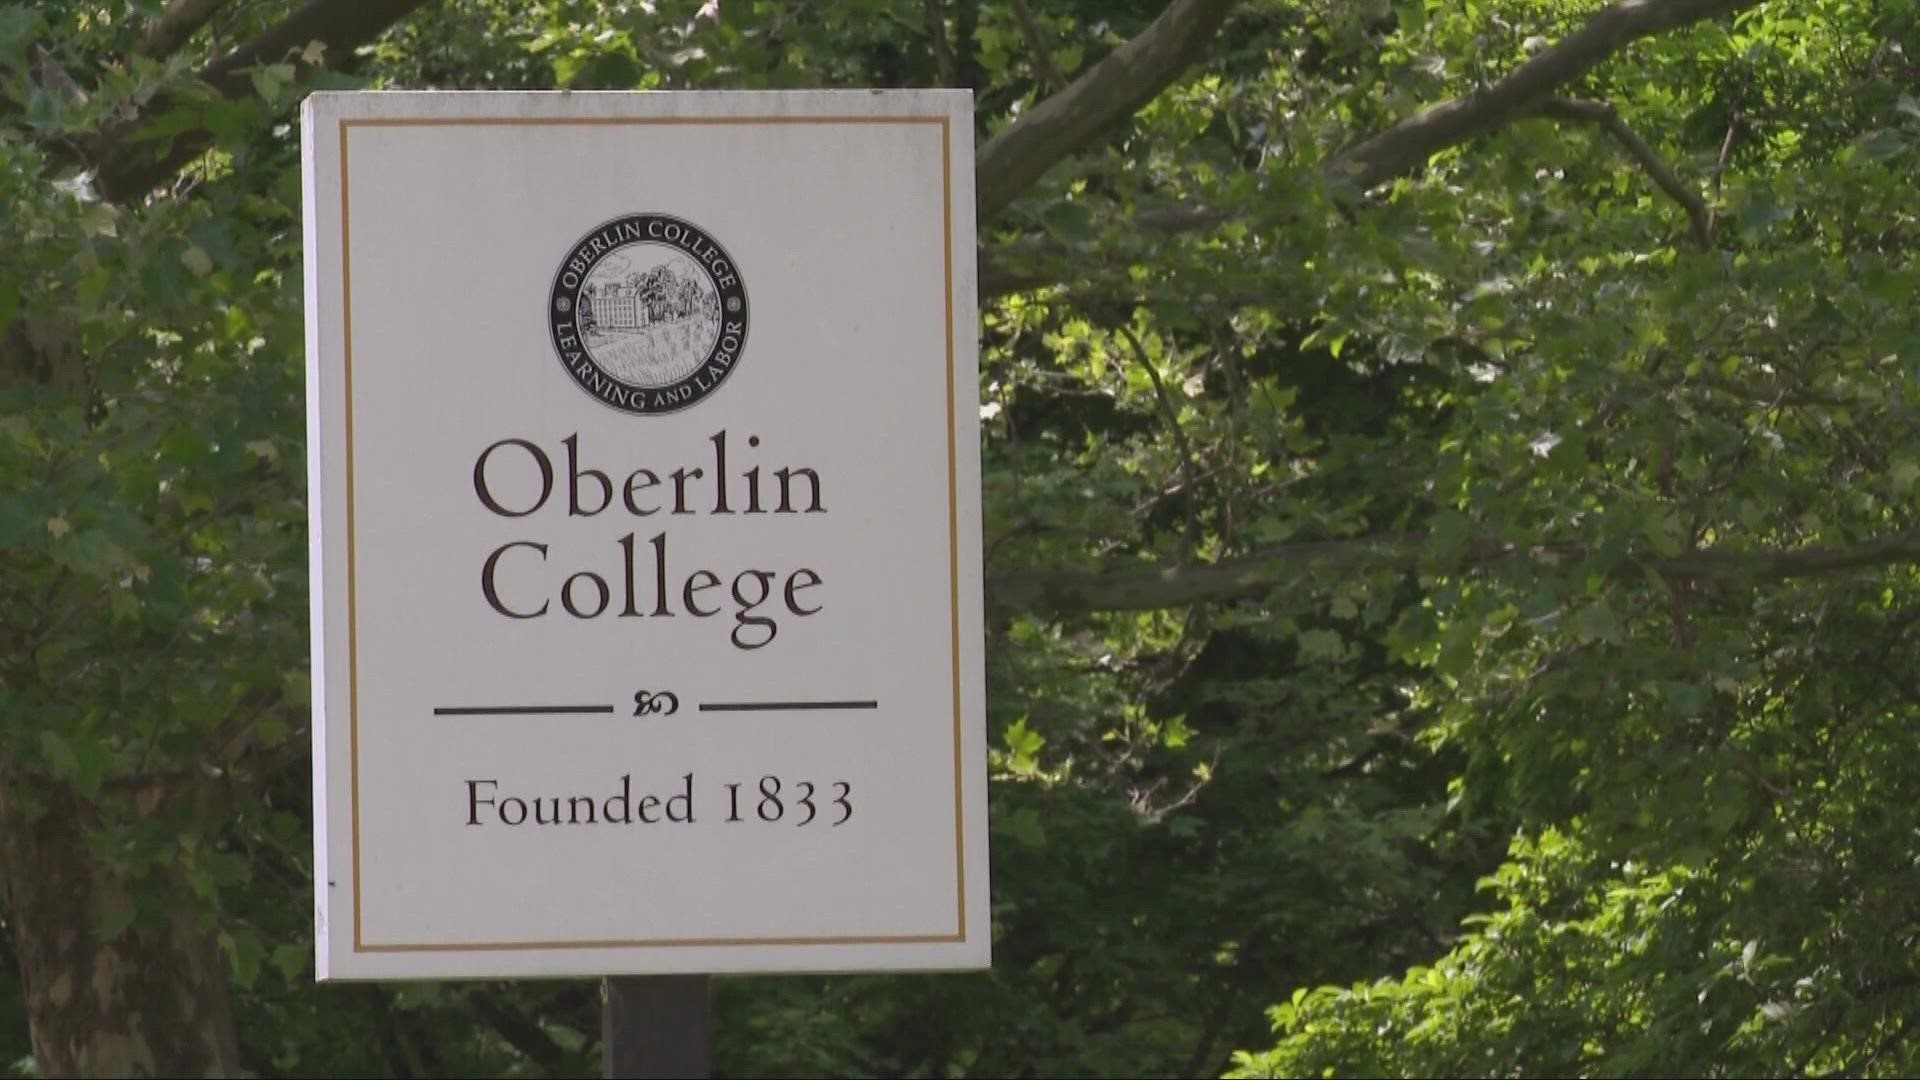 Oberlin College was ordered to pay damages to the owners of Gibson's Bakery, who accused the college of ruining their business by branding them as racists.